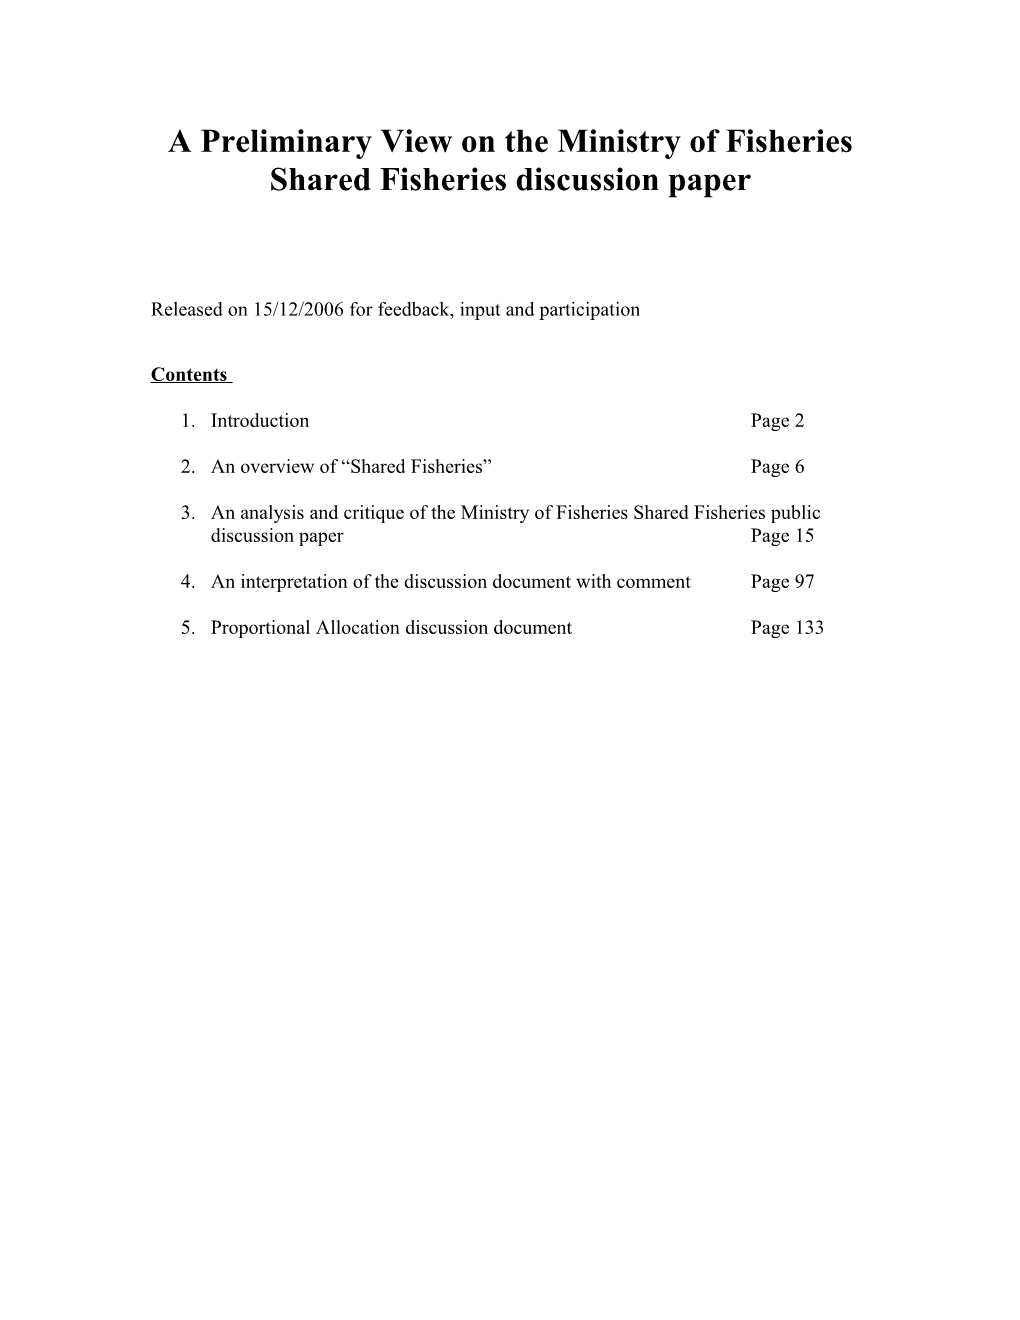 A Preliminary View on the Public Discussion Paper Presenting Proposals for Managing New